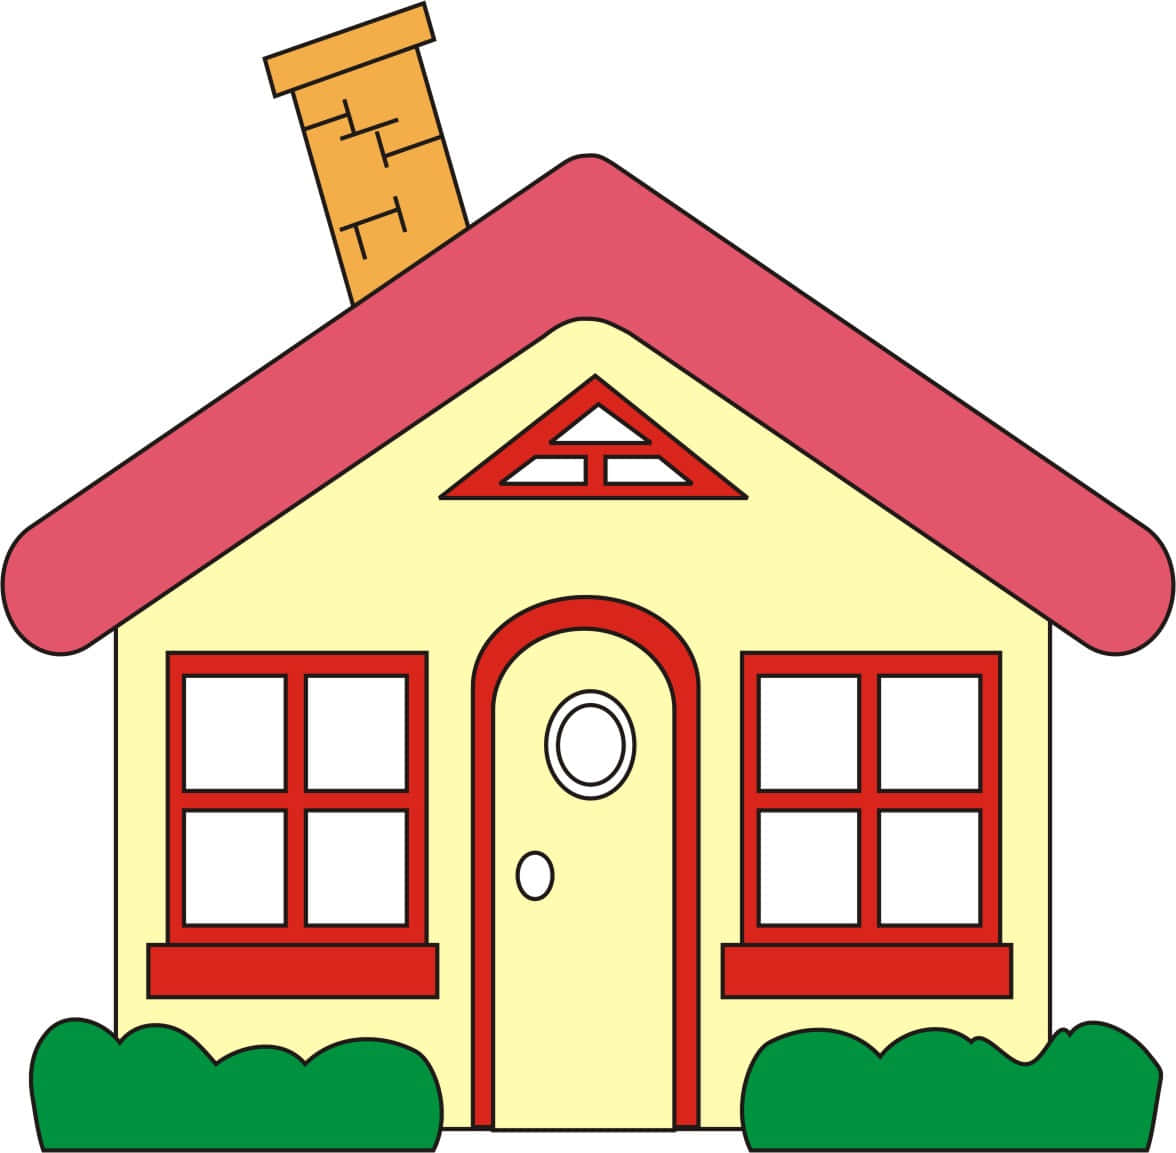 A Cartoon House With A Red Roof And Chimney